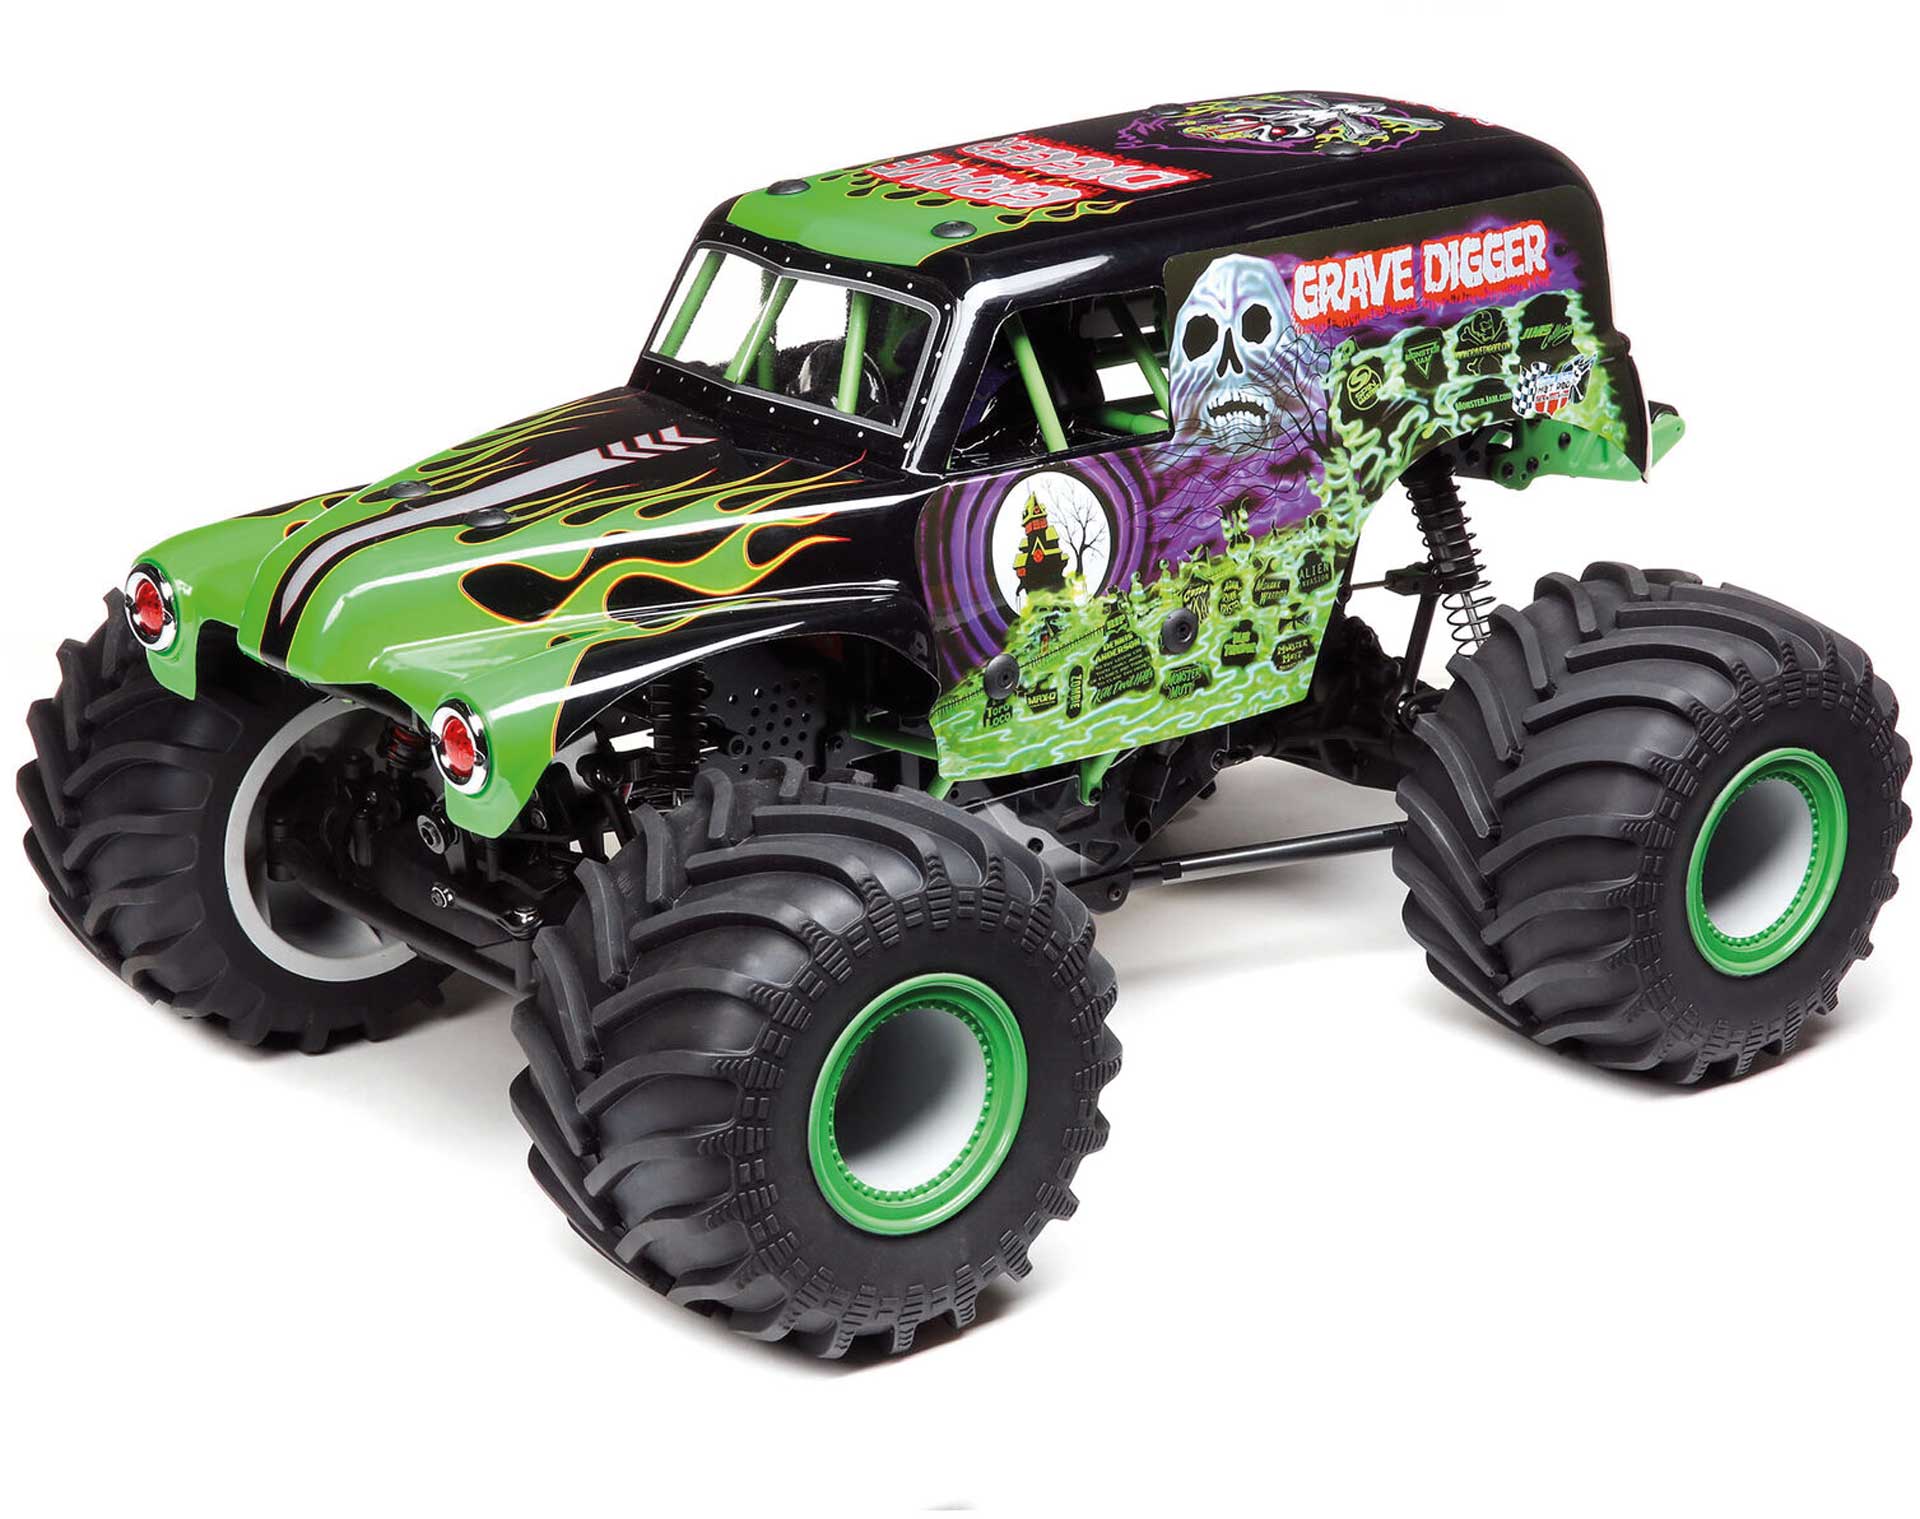 LOSI LMT:4wd Solid Axle Monster Truck, Grave Creuseur:RTR